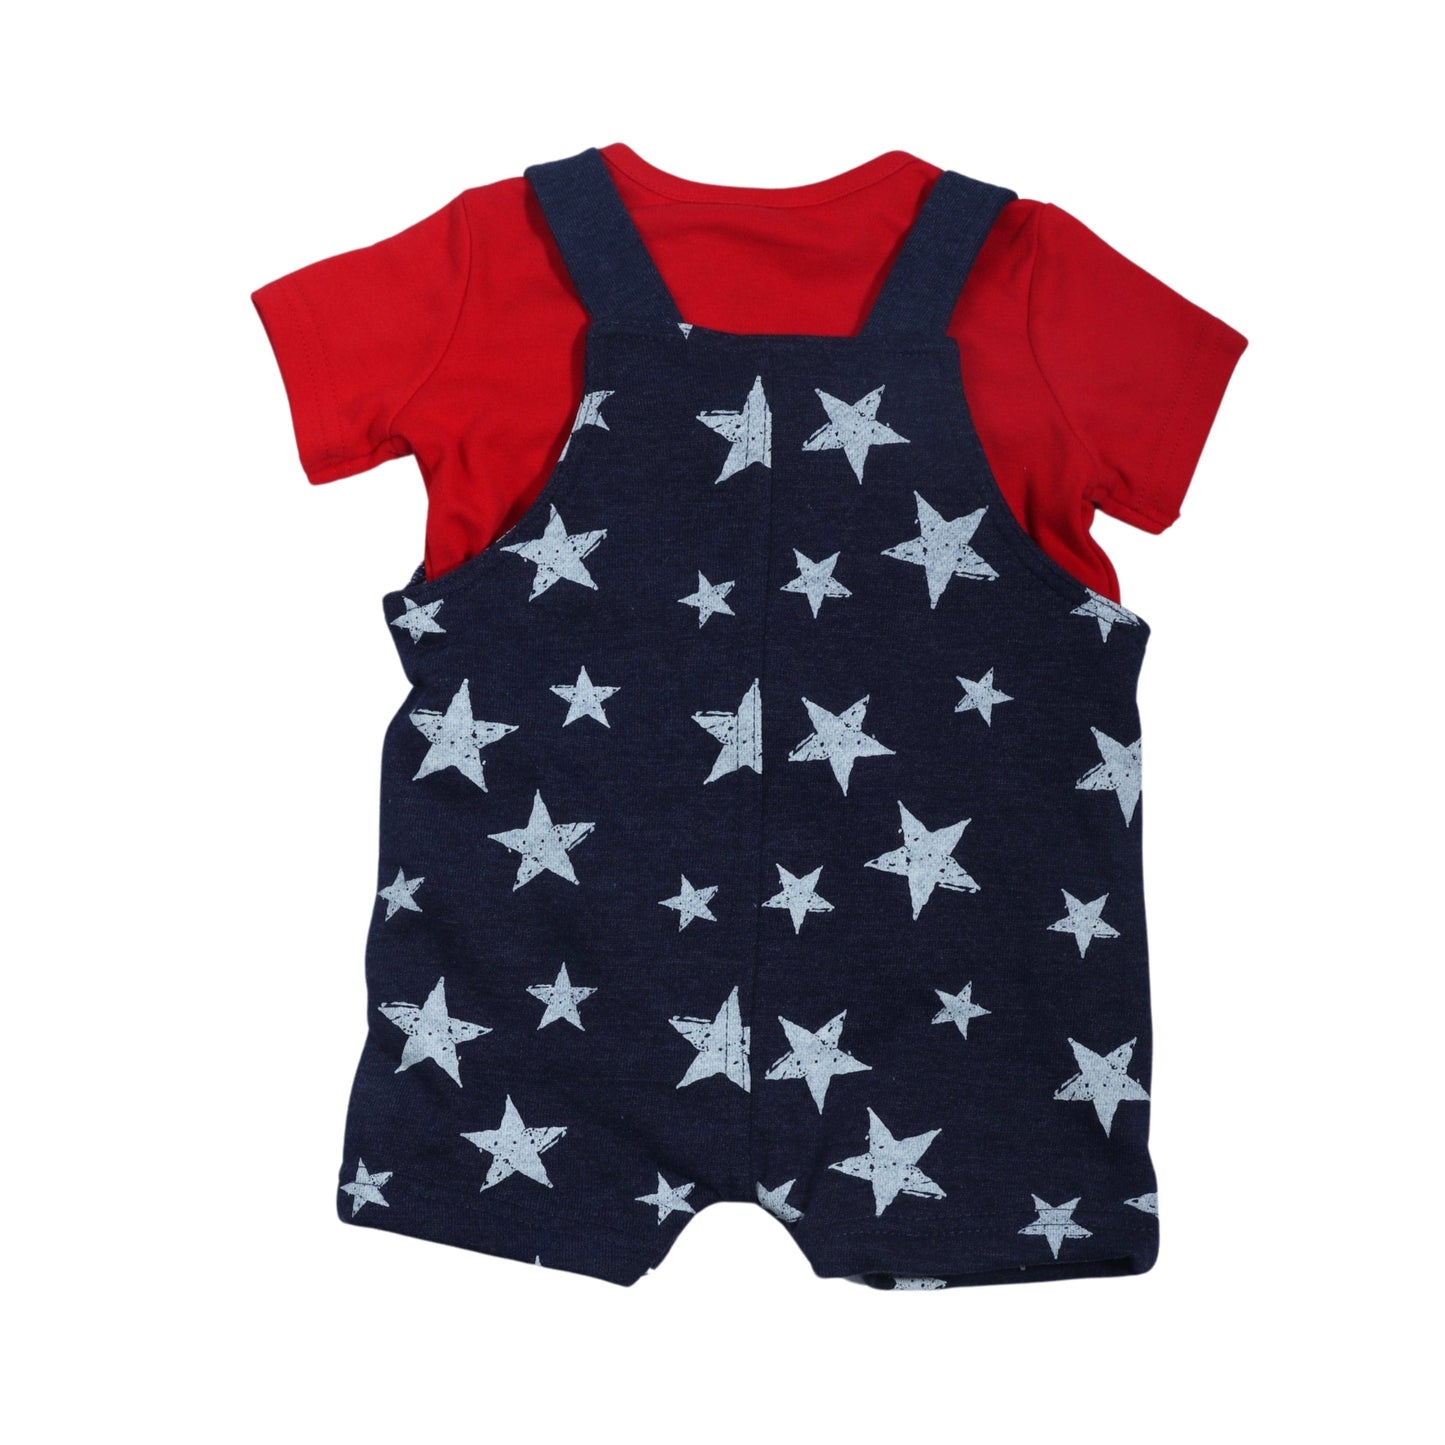 ORIGINAL Baby Boy 3-6 Month / Multi-Color ORIGINAL - Baby - Short Sleeve Top And All Stars Printed Romper Set